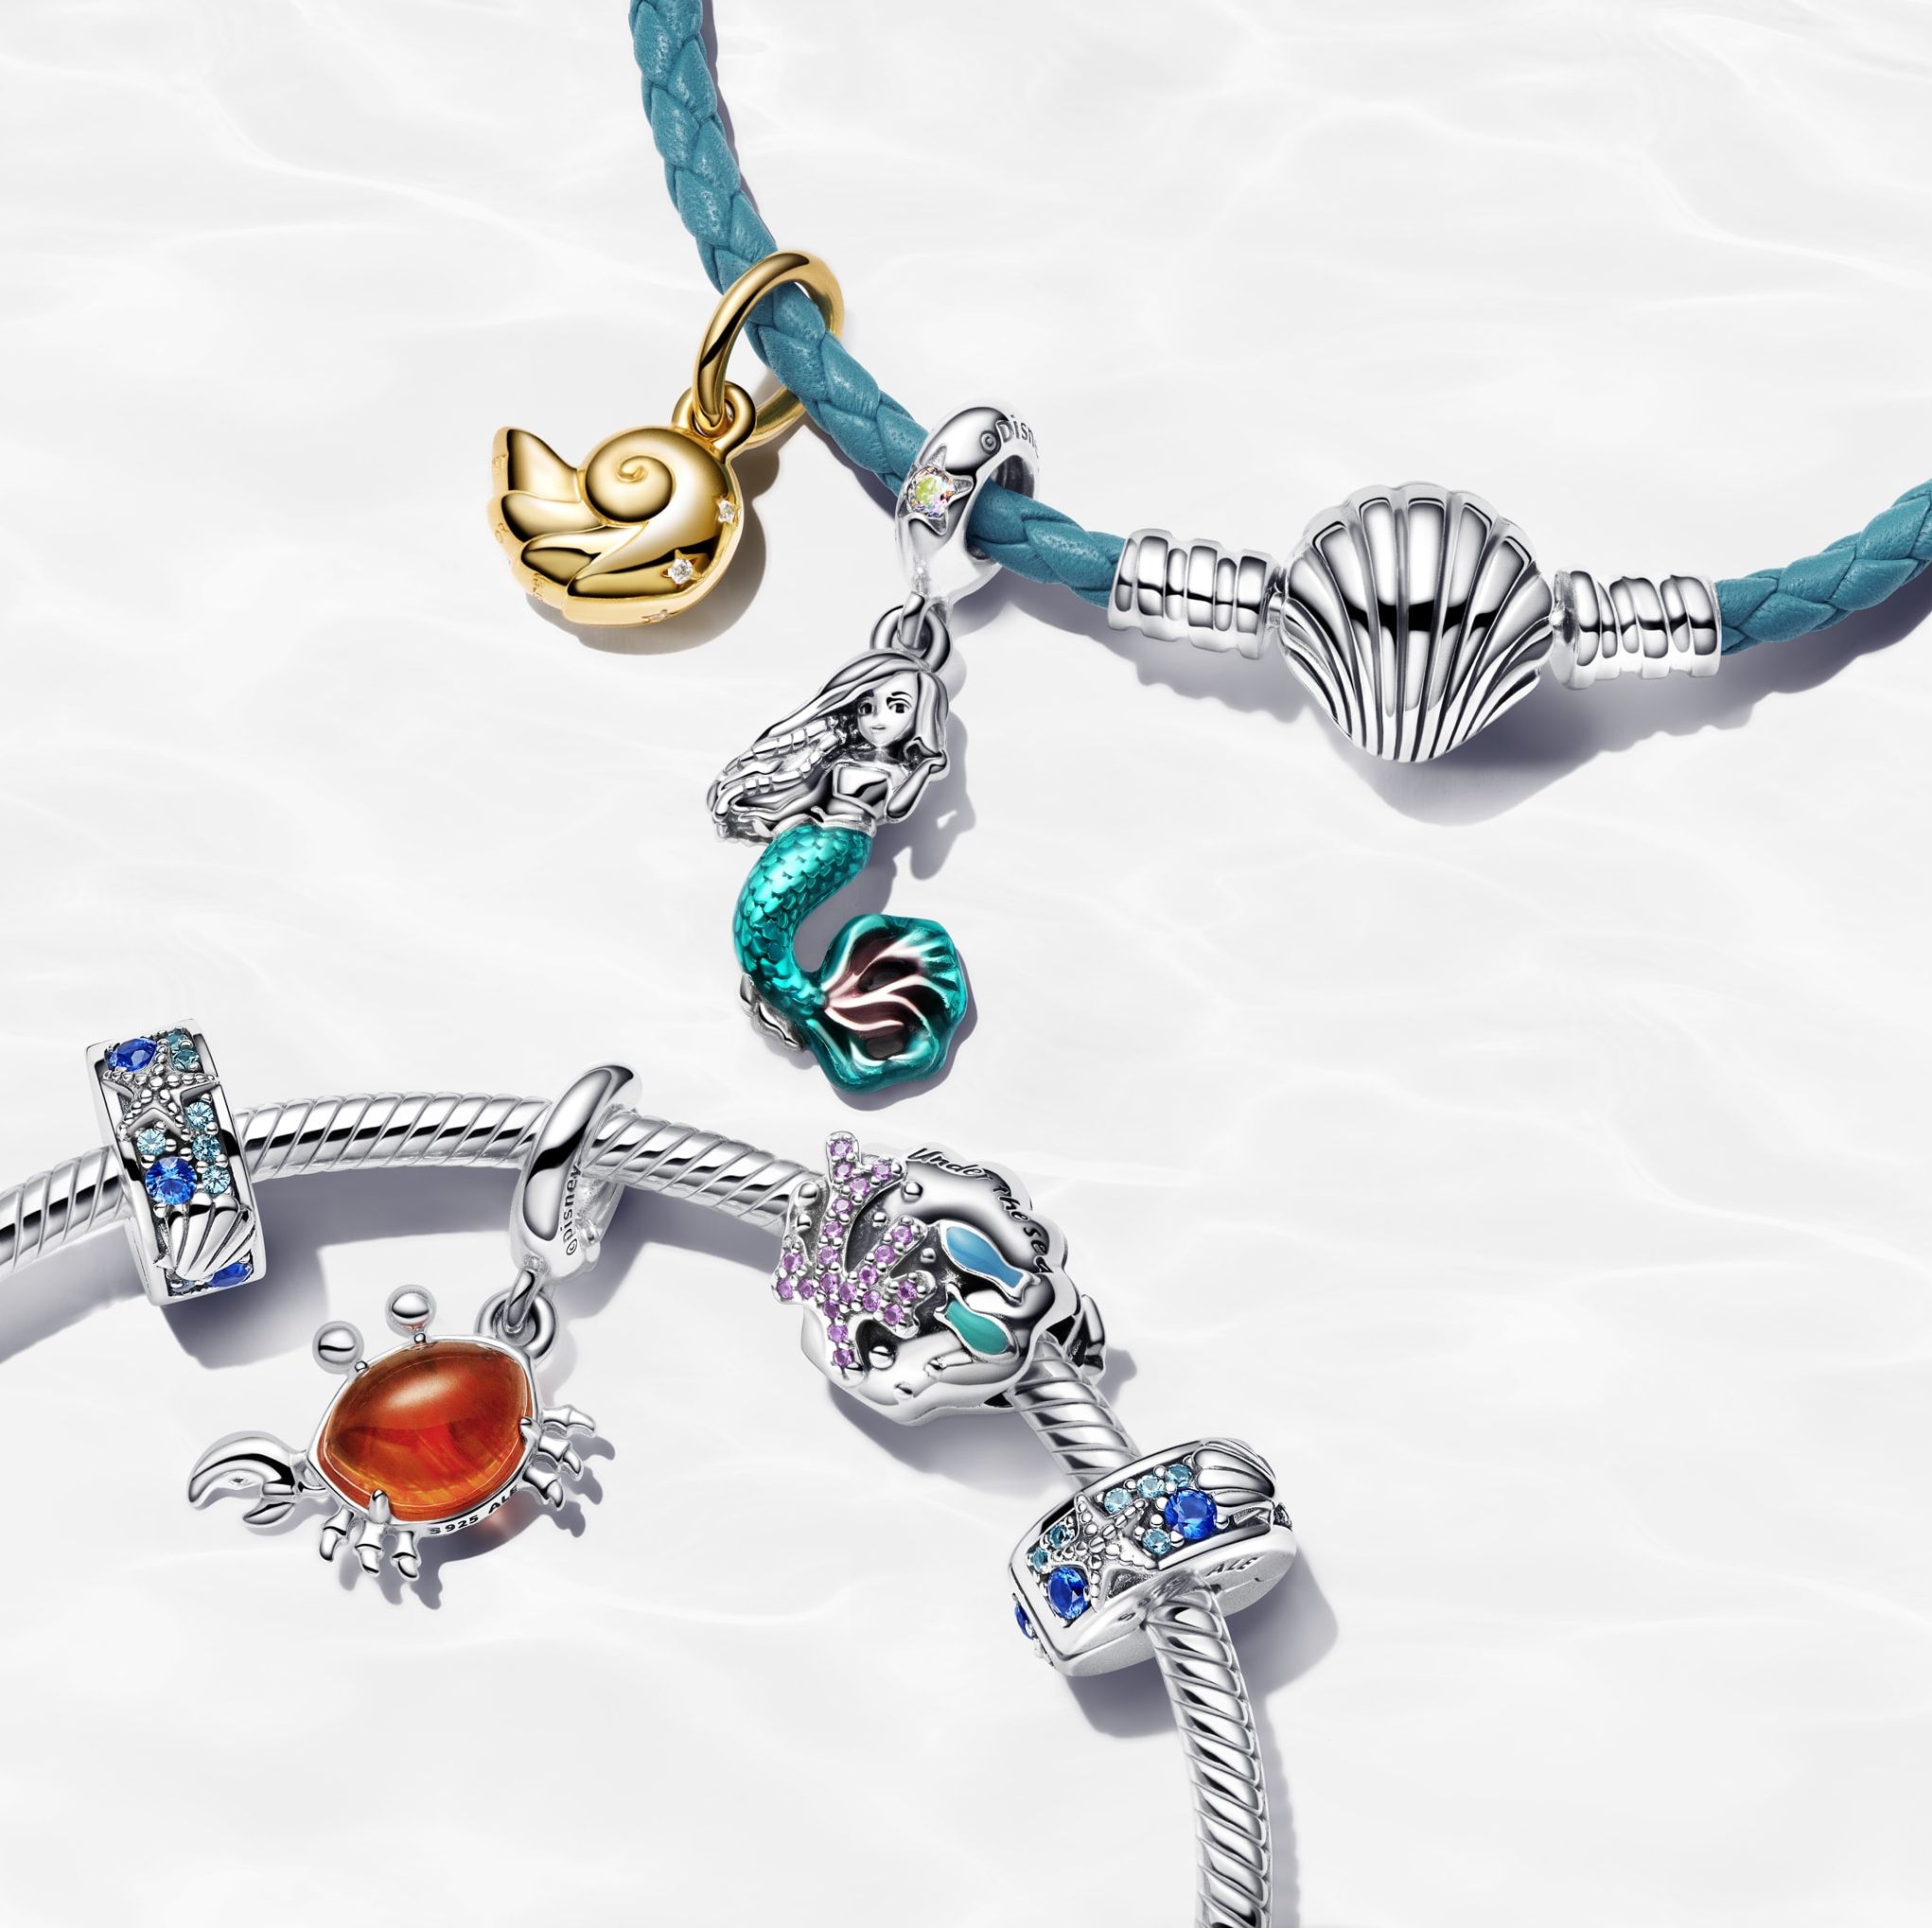 Pandora Just Collaborated With Disney on a Collection Inspired by 'The Little Mermaid'...and I'm Obsessed